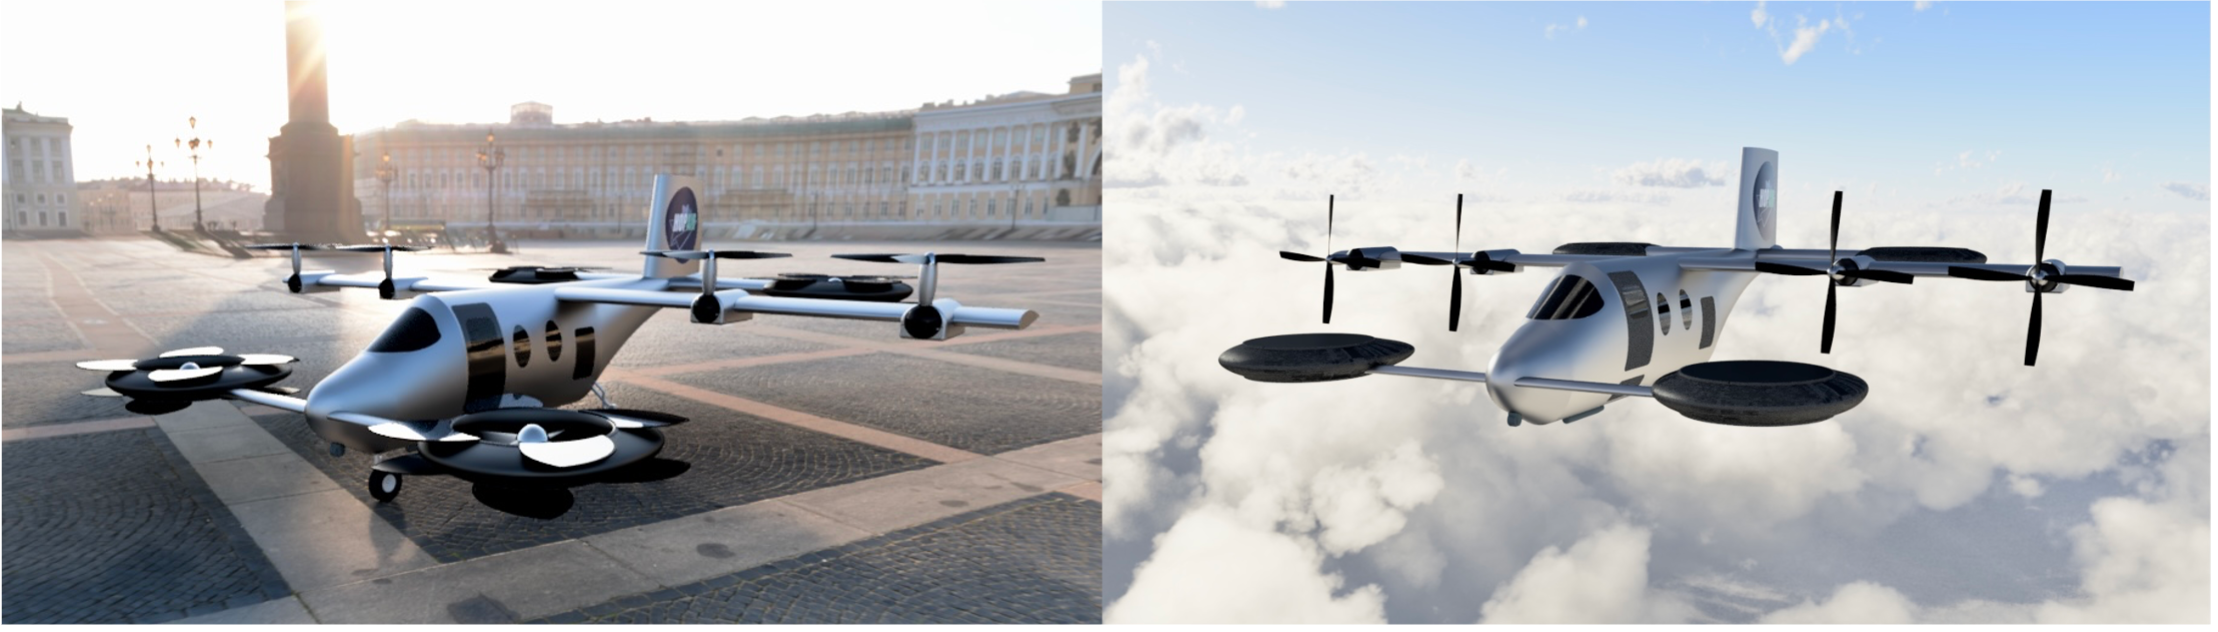 Urban Air Mobility The Future Of Air Ambulance Transport